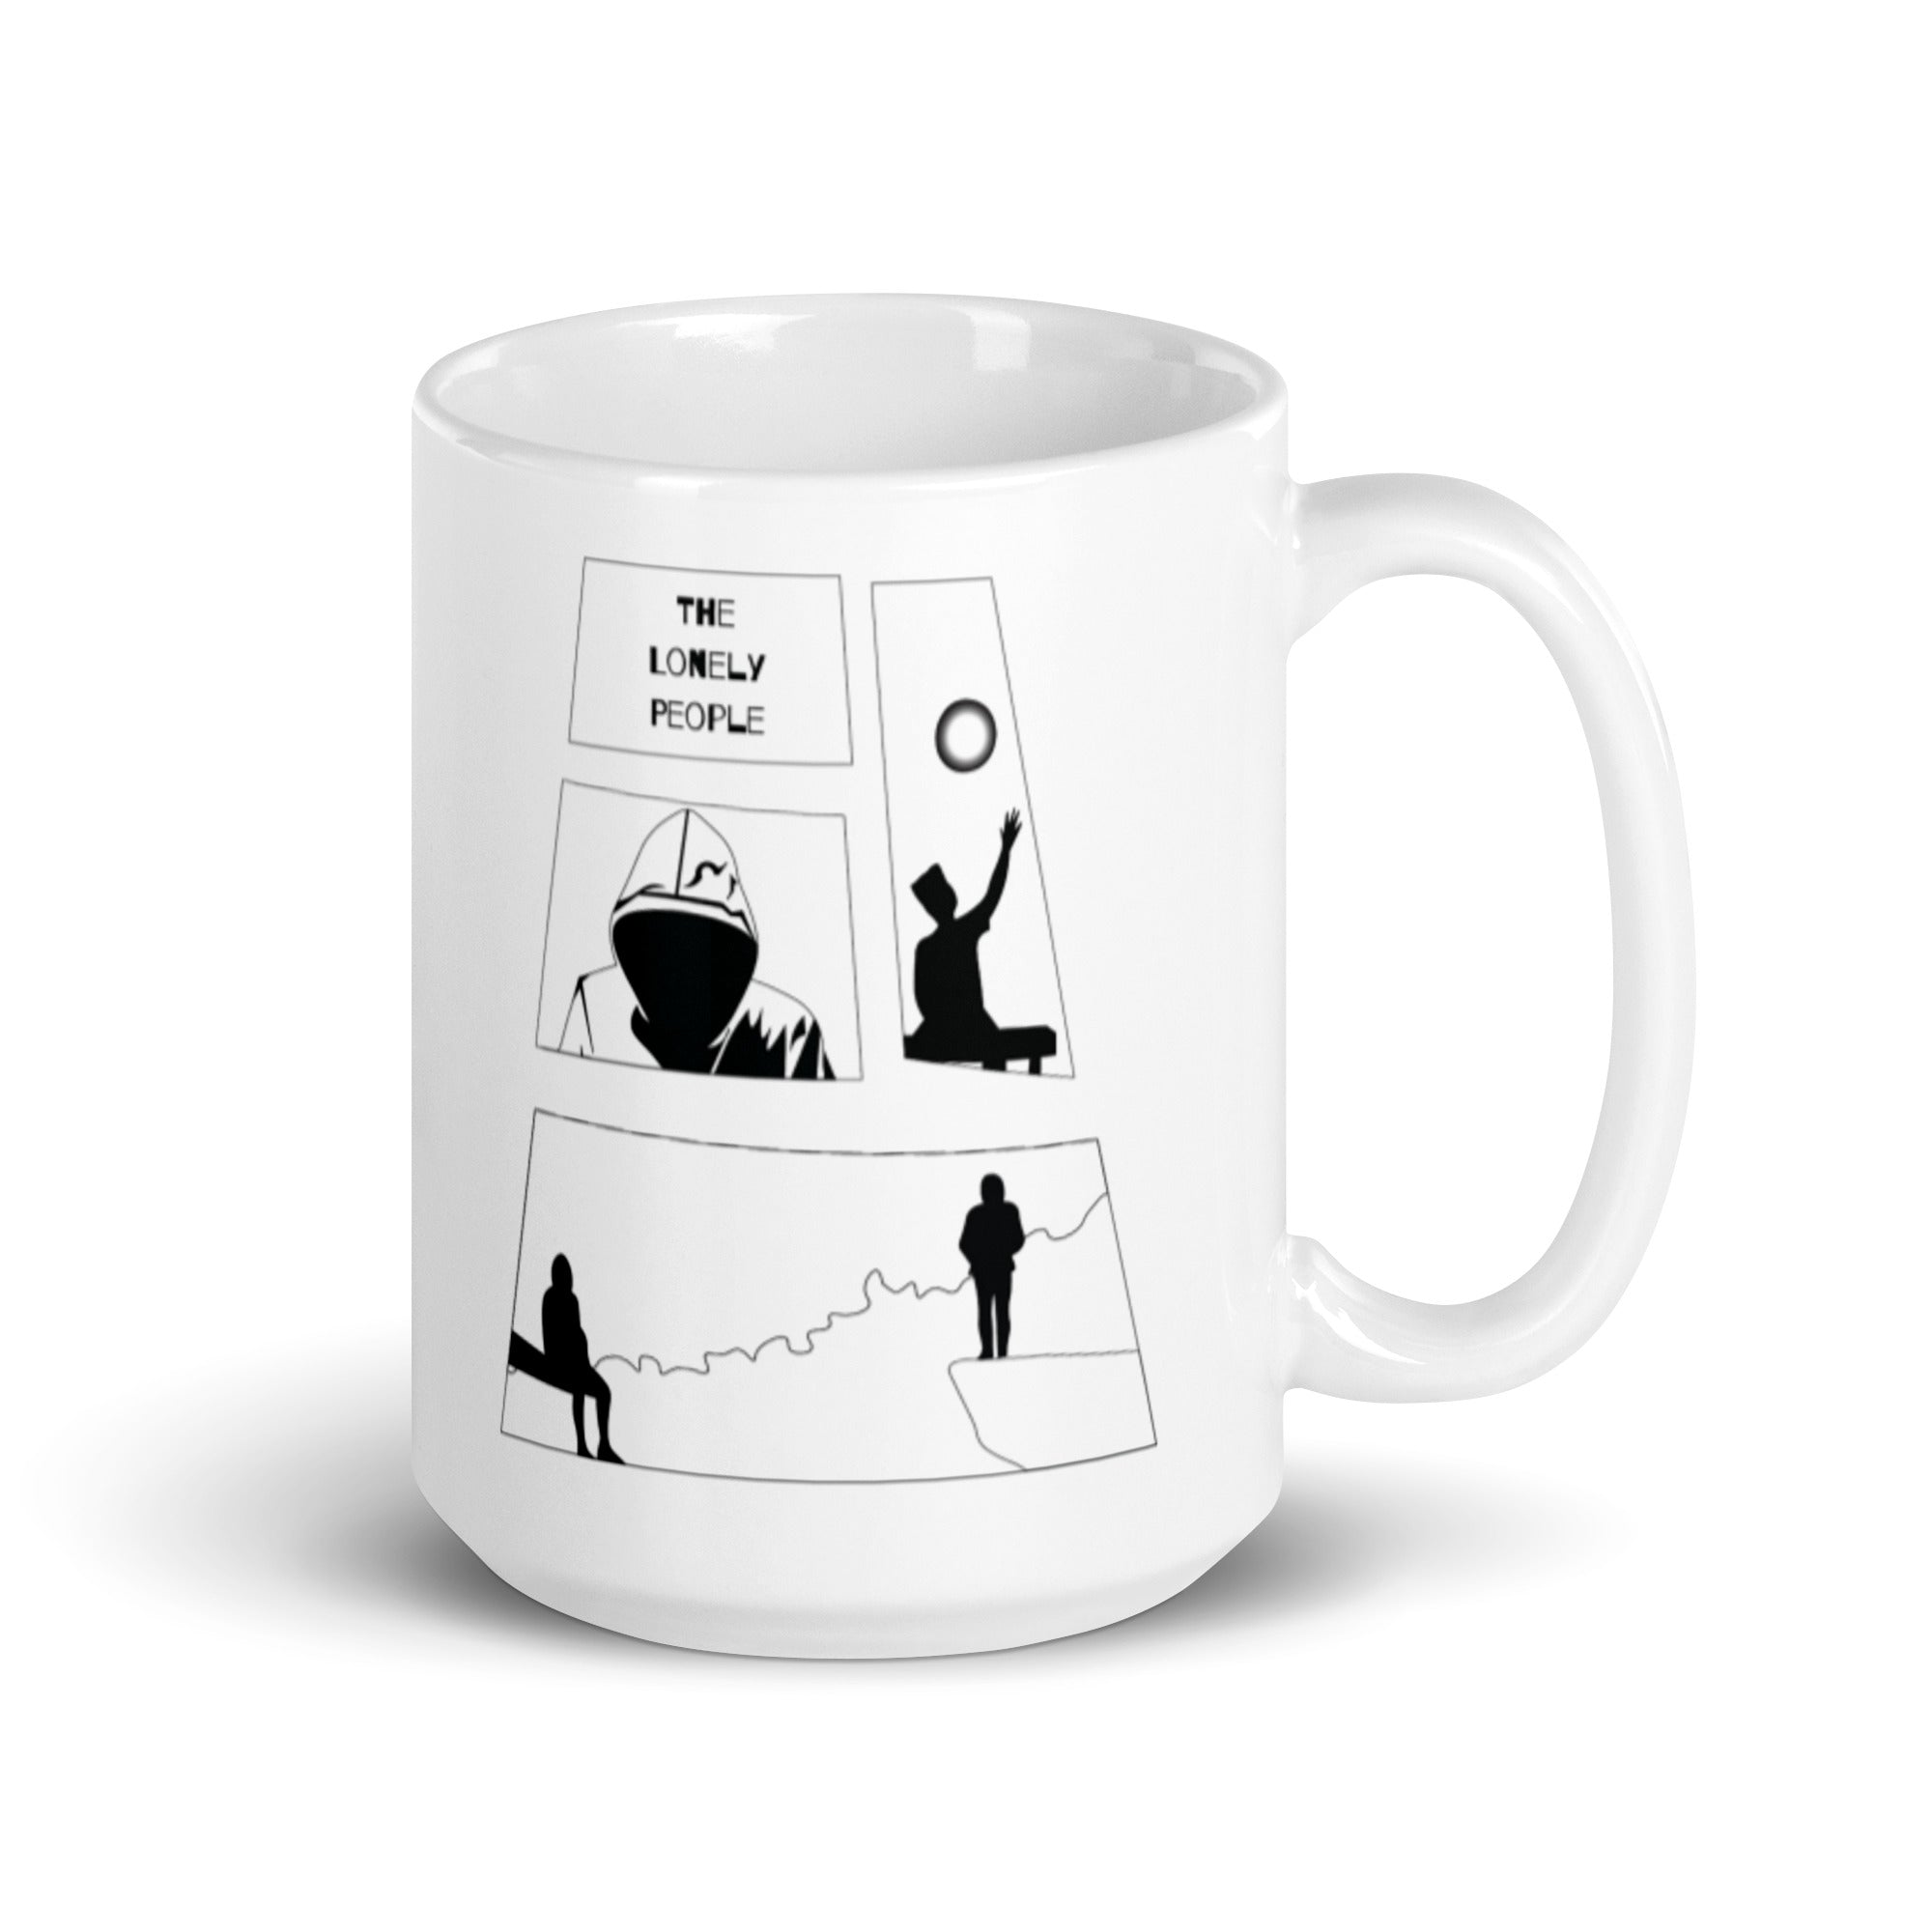 The Lonely People - White glossy mug